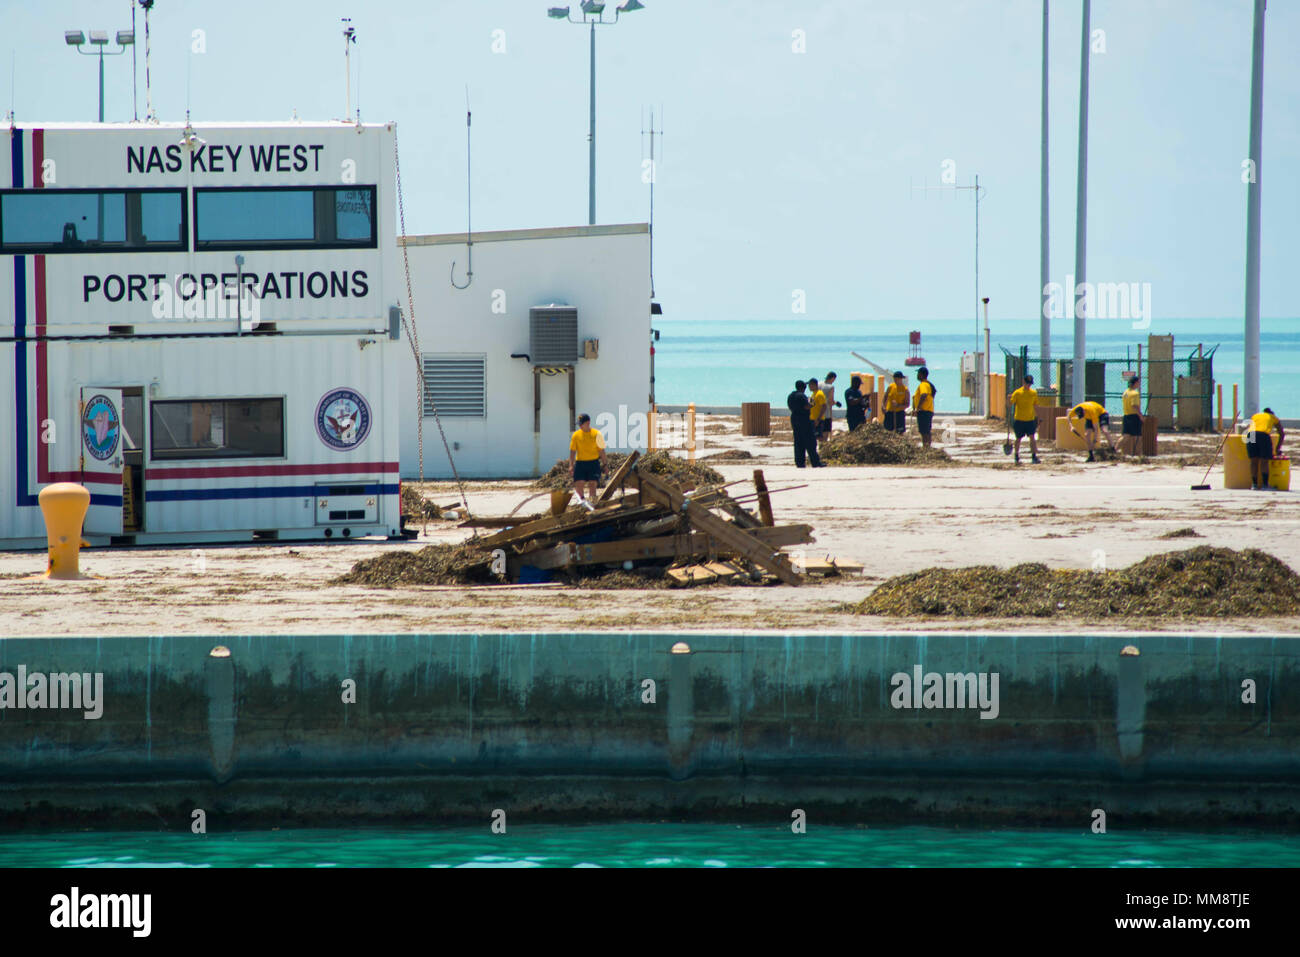 170913-N-DS065-0129 KEY WEST, Fla. (Sept. 13, 2017) Sailors clean the pier at Naval Air Station Key West, Fla., during humanitarian assistance efforts following Hurricane Irma’s landfall in Key West. The Department of Defense is supporting Federal Emergency Management Agency, the lead agency, in helping those affixed by Hurricane Irma to minimize suffering and as one component of the overall whole-of-government response efforts. (U.S. Navy photo by Mass Communication Specialist 3rd Class Evan A. Denny/Released) Stock Photo